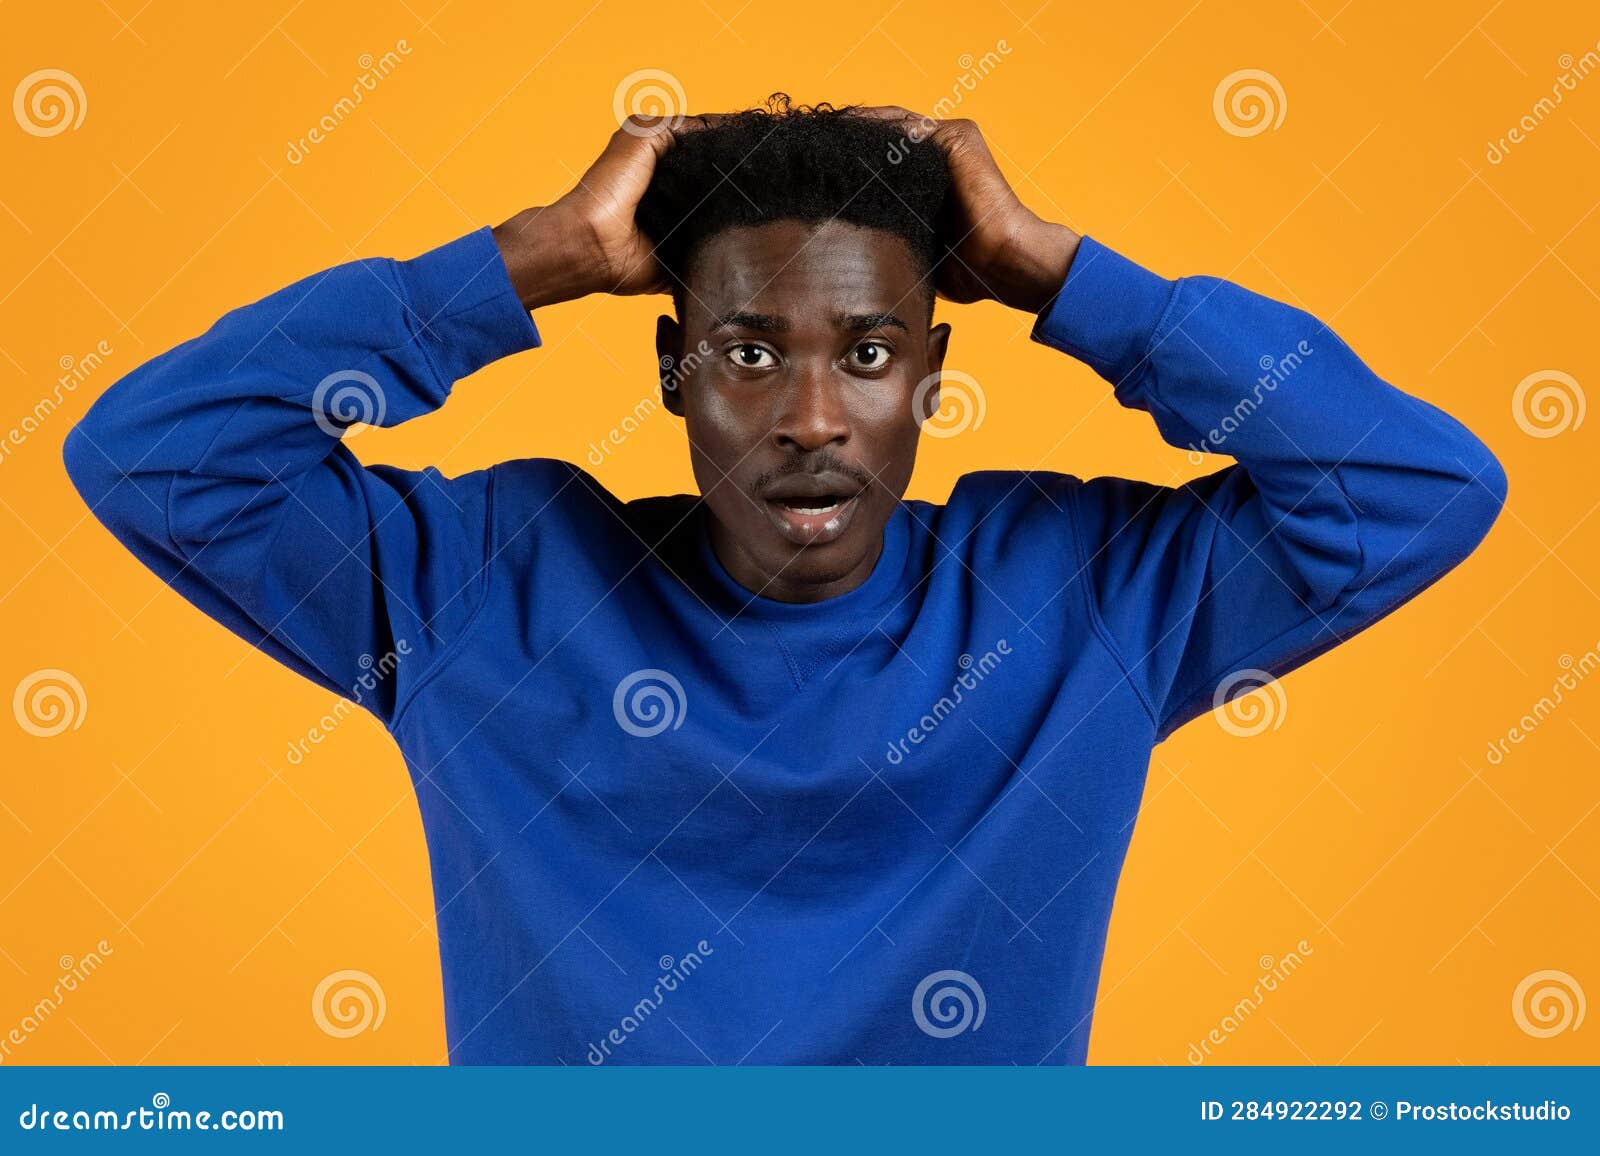 Shocked Young Black Guy Touching His Head Stock Photo - Image of ...